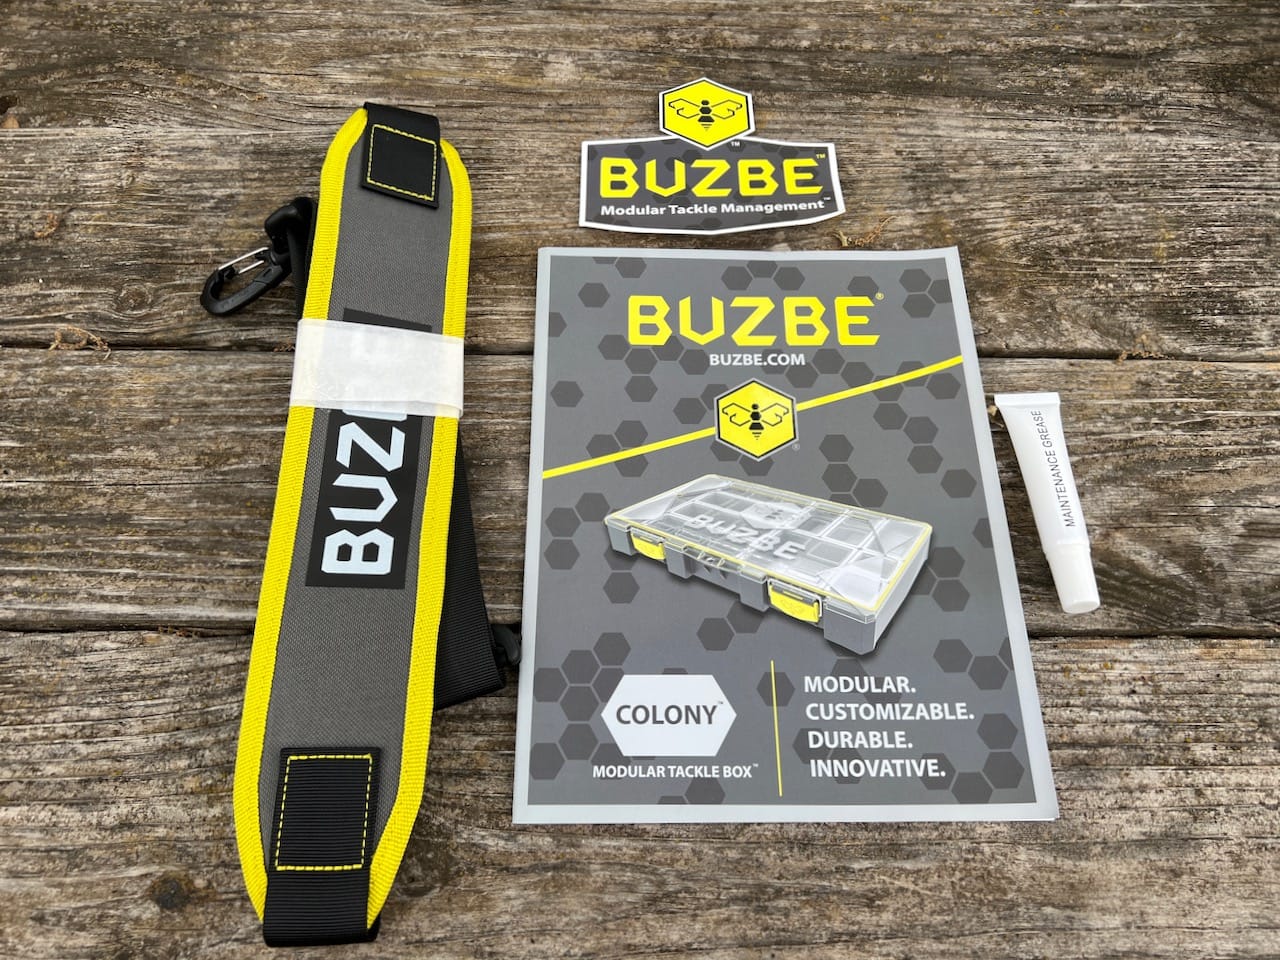 Buzbe - New for 2022… The #BUZBE Swarm Tackle Bag 🐝🔥👀 #ICAST